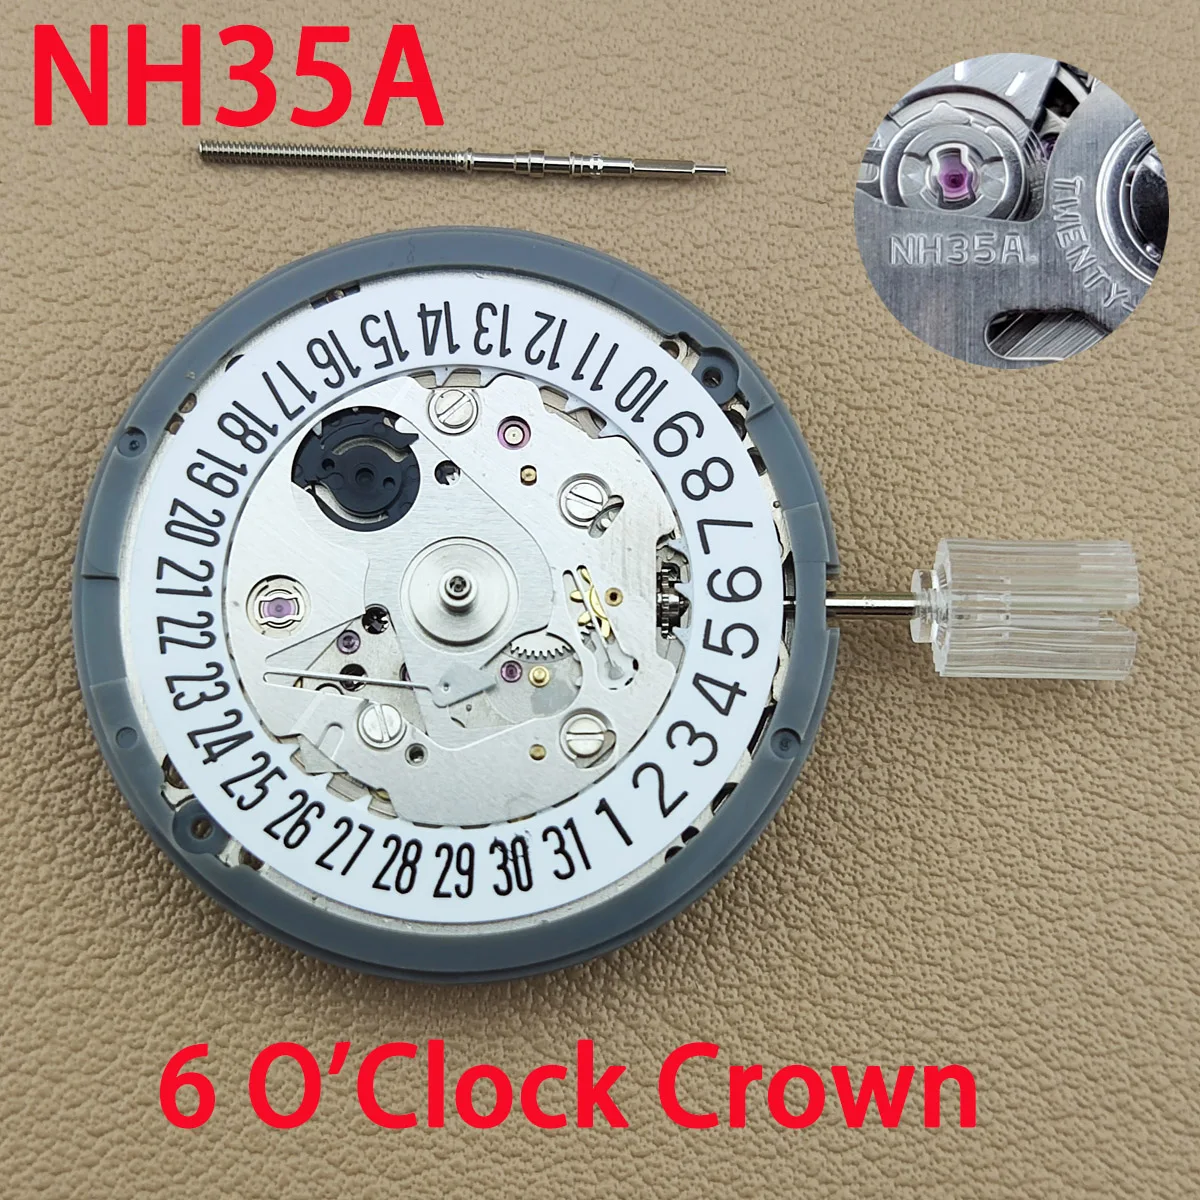 

Japan Original NH35/NH35A Mechanical nh35 Movement 9 o clock crown white Date Automatic Watch Movt Replace Kit High Accuracy